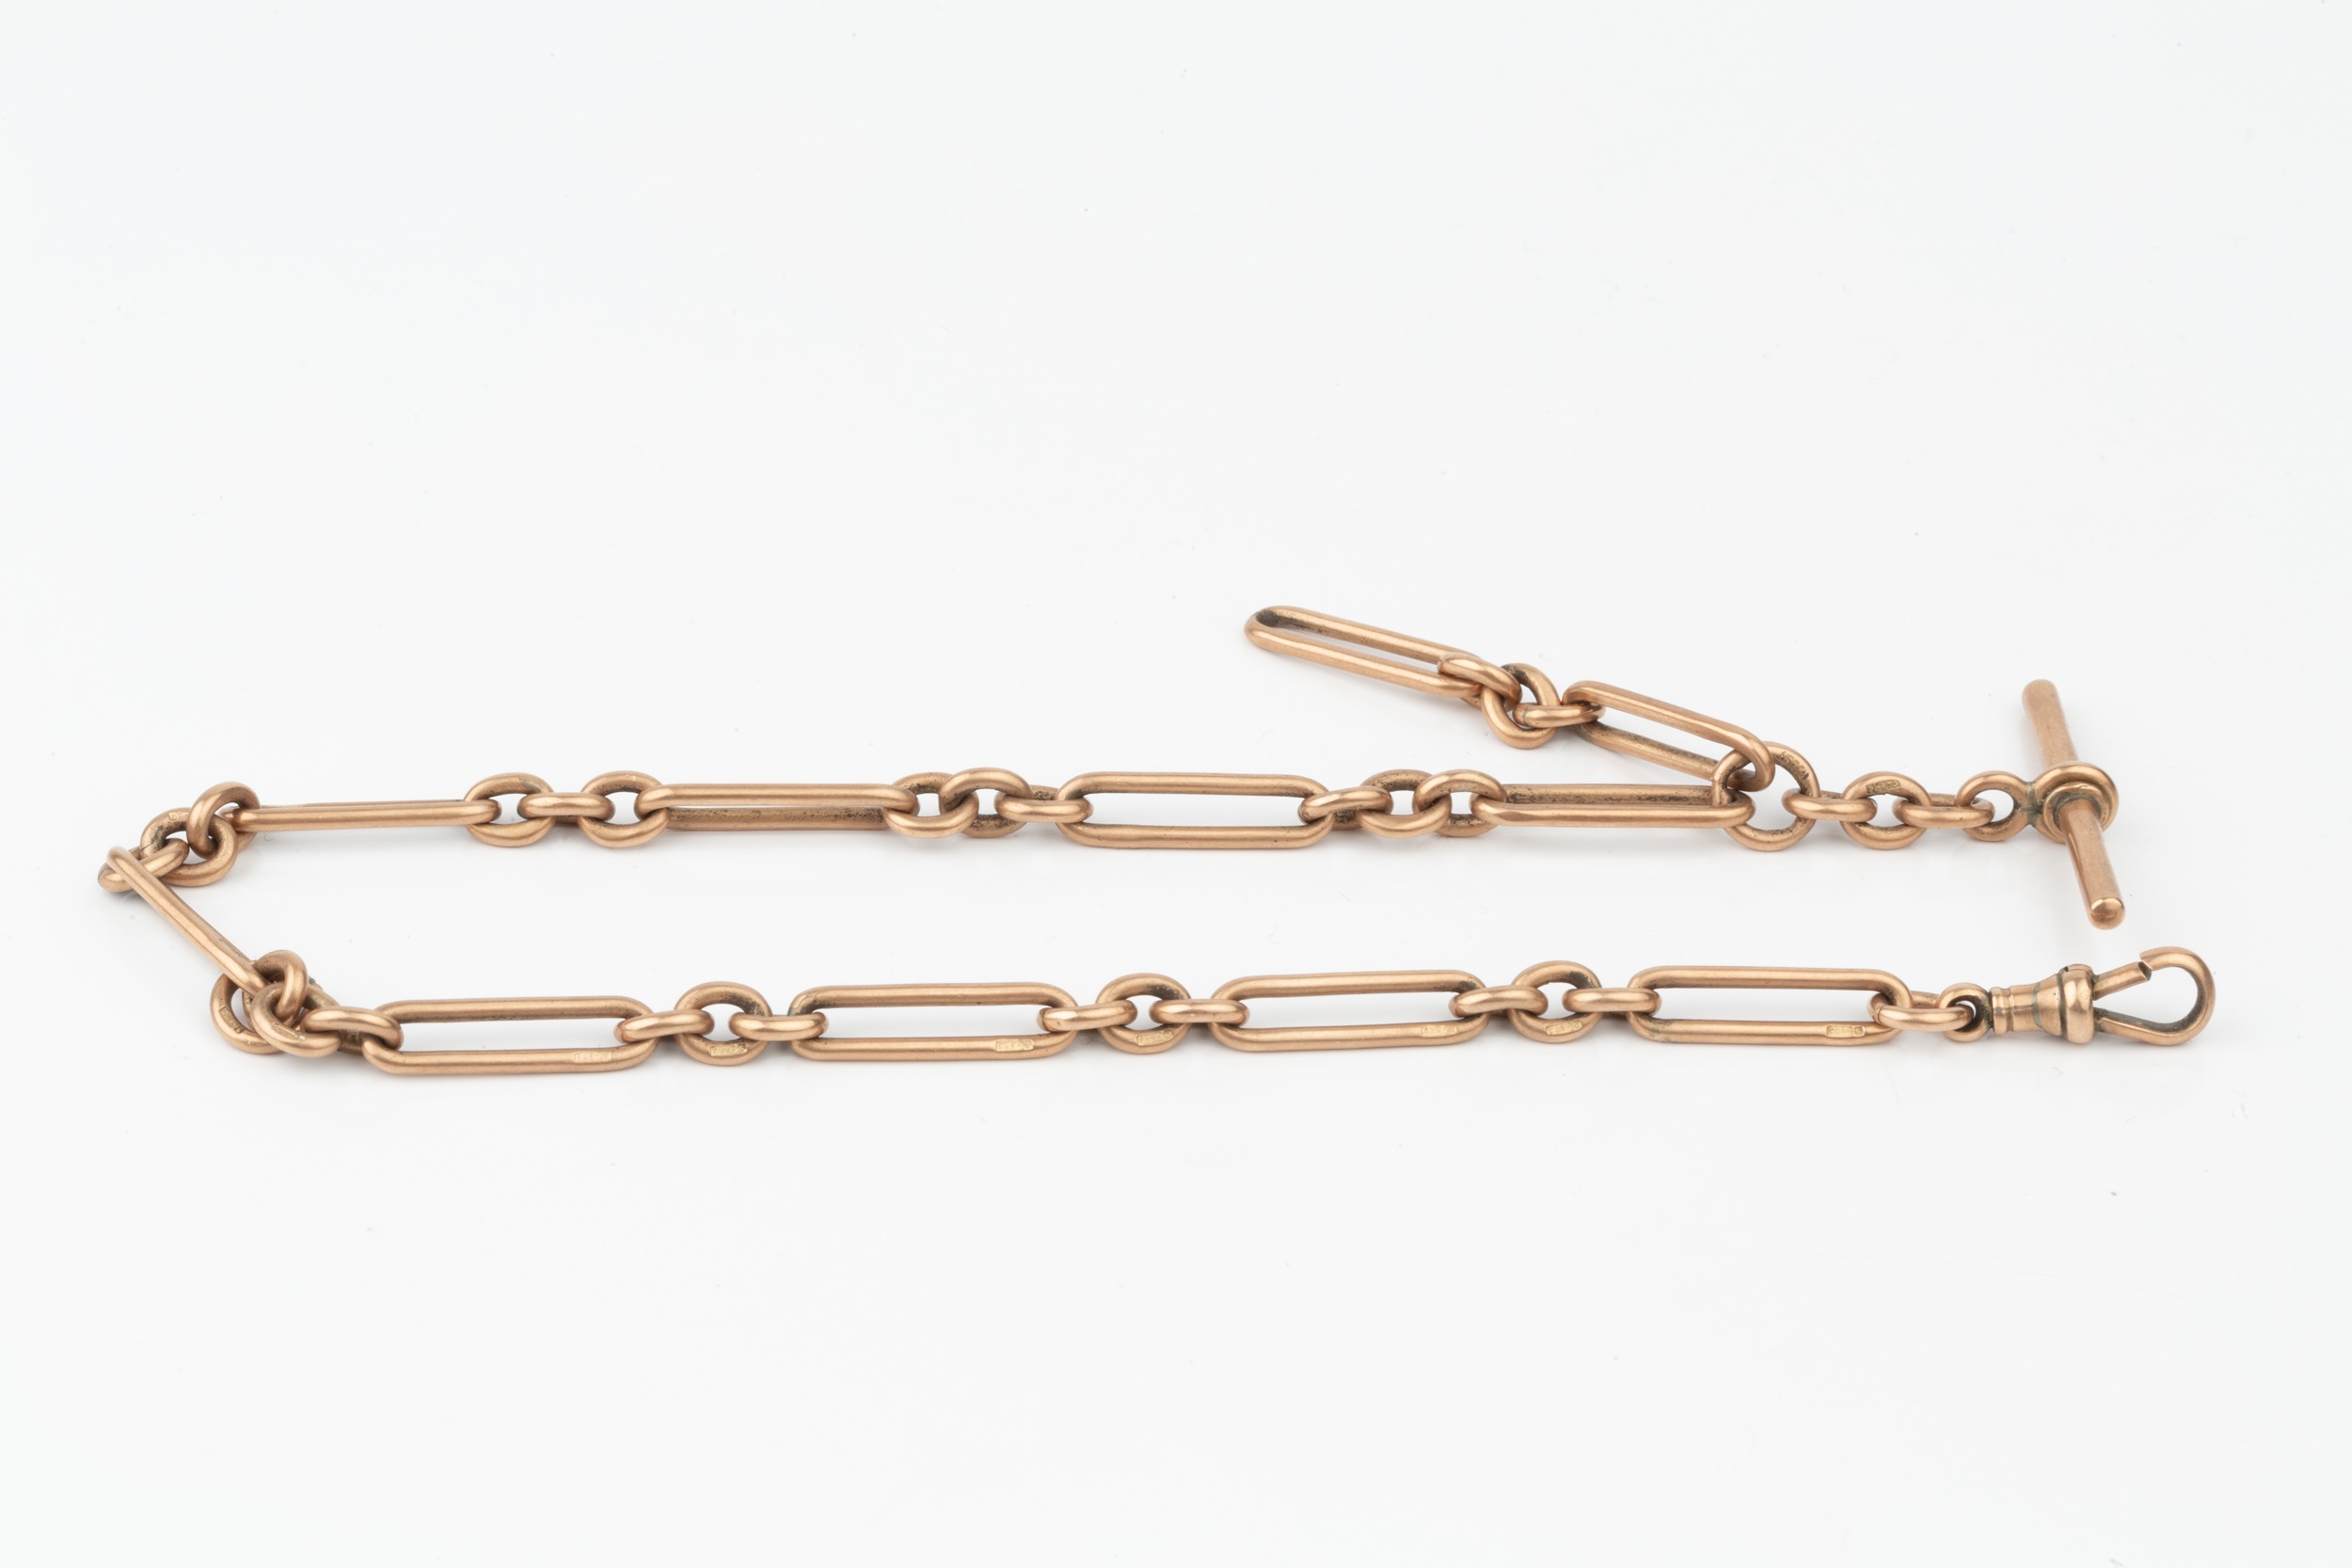 A 9ct gold albert chain, with elongated open links and T-bar, 34cm long approx weight 30.3g. The - Image 2 of 2